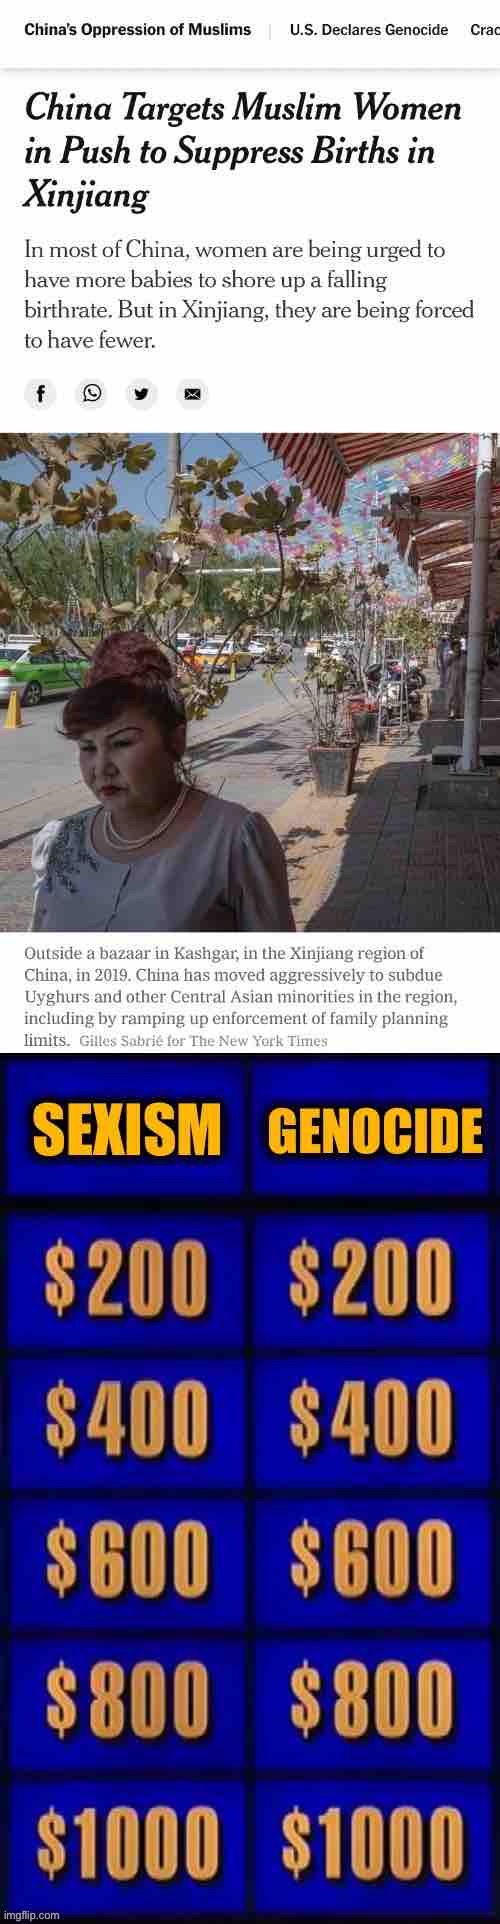 Fascist Chinese government leads in both categories | image tagged in racism,sexism,genocide,china,muslims,sexist | made w/ Imgflip meme maker